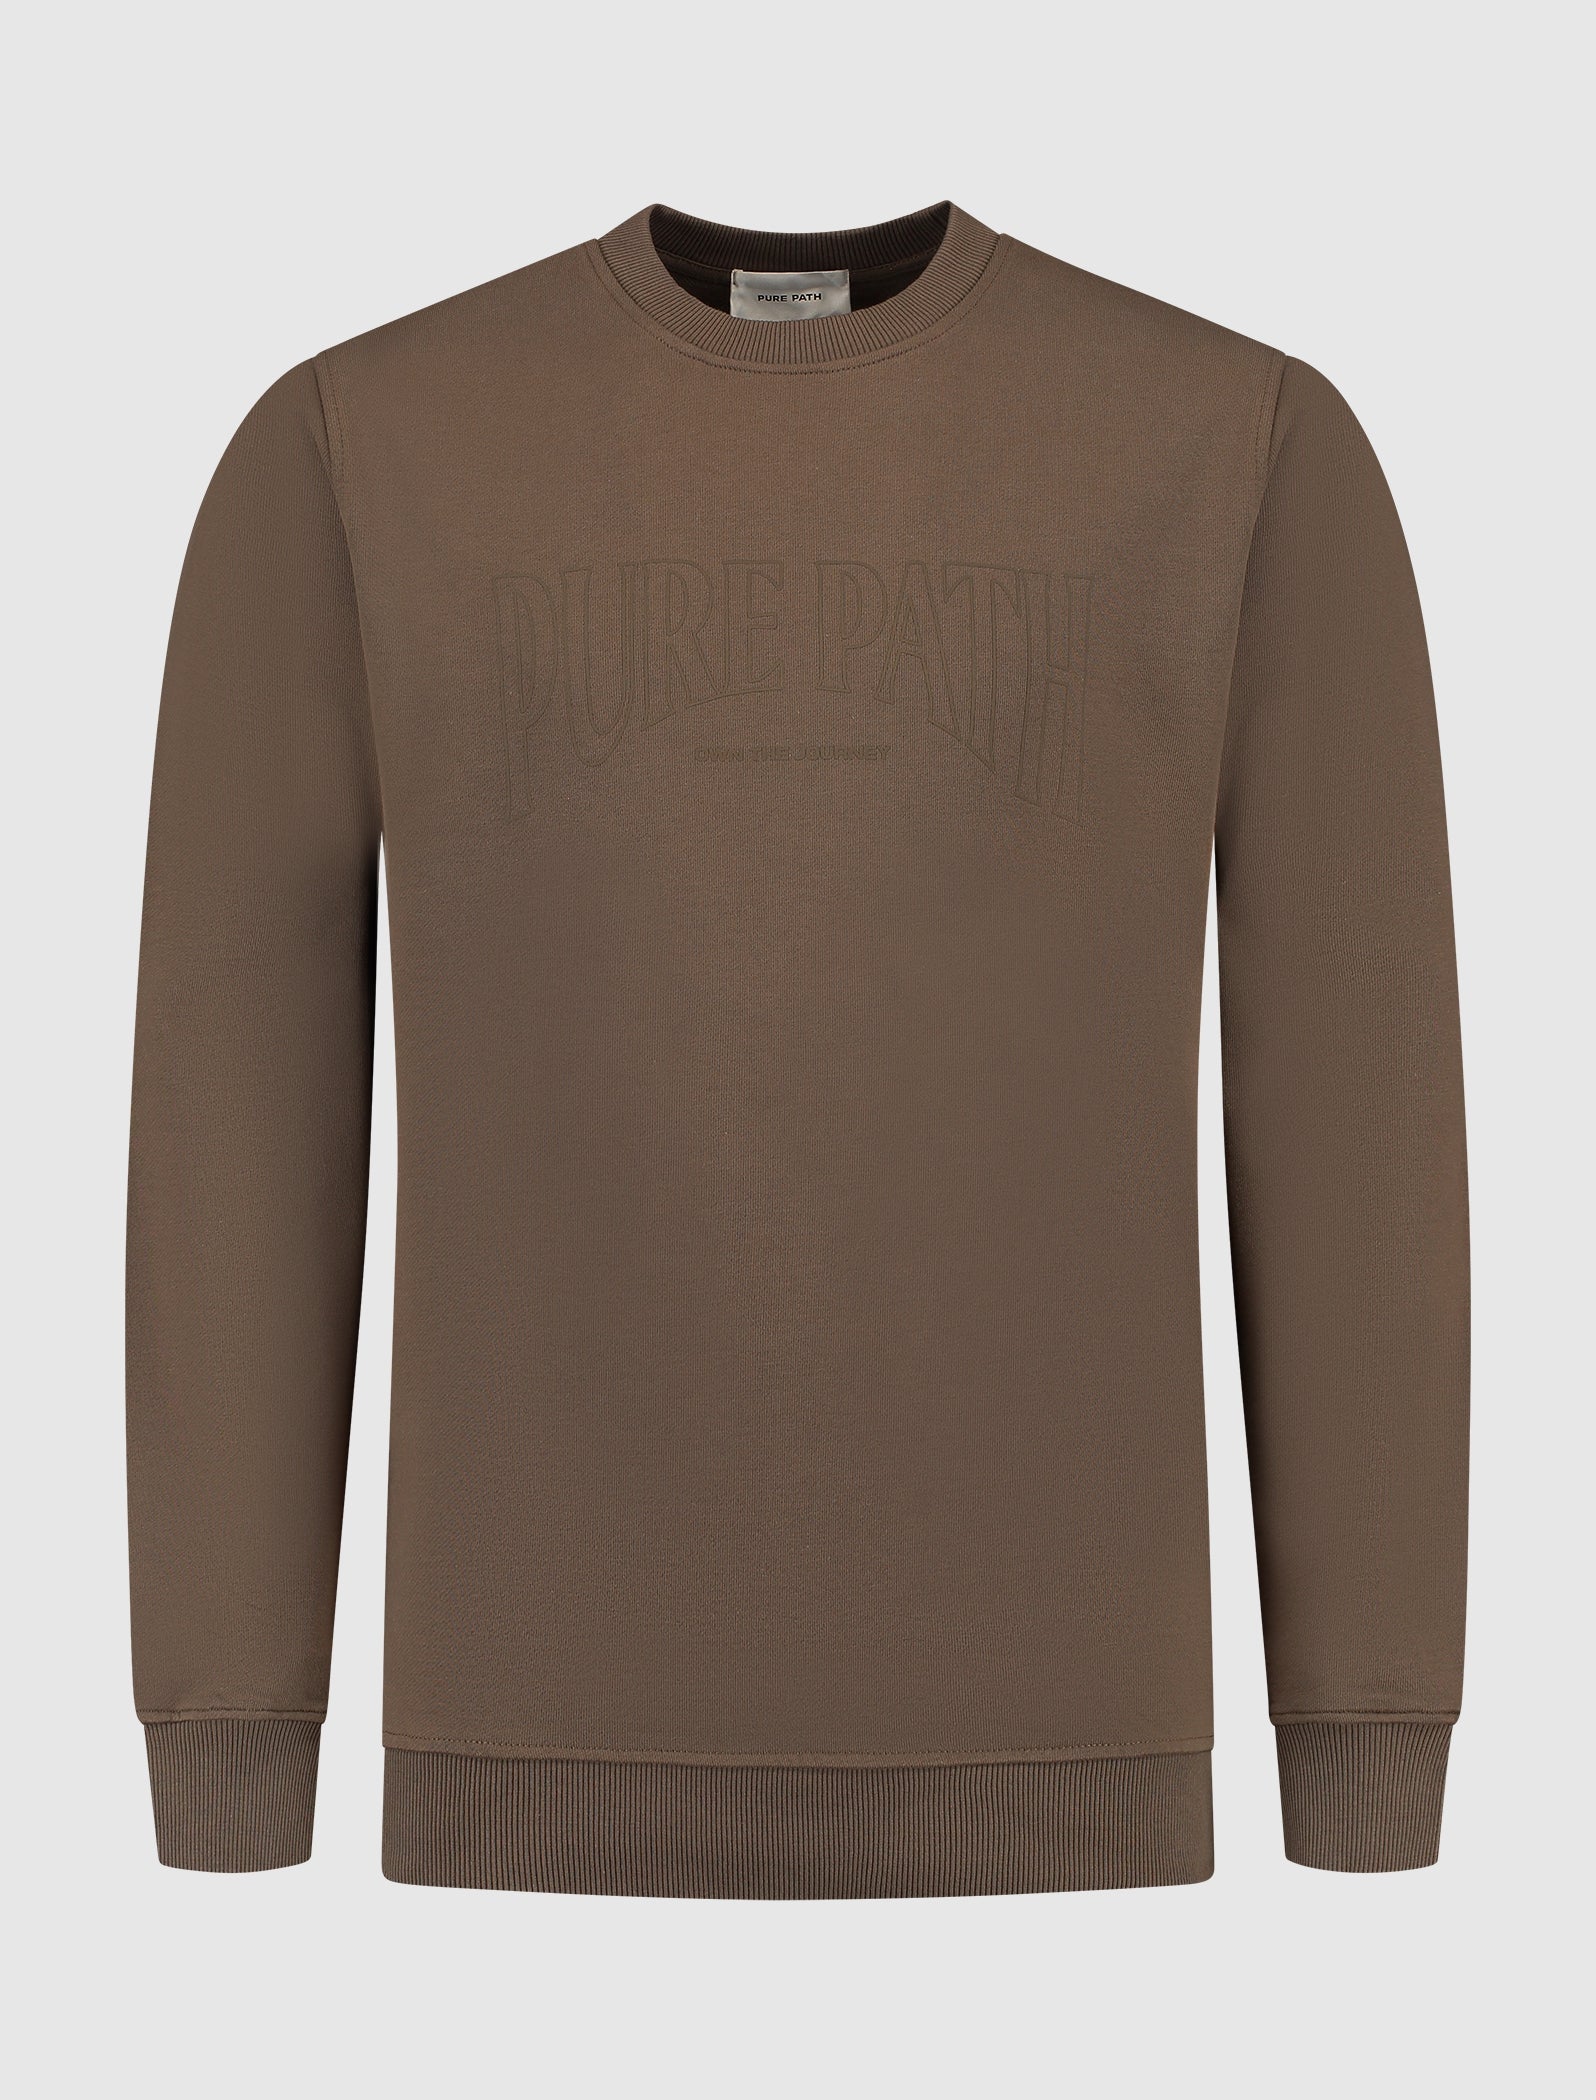 Outline Focus Sweater | Brown